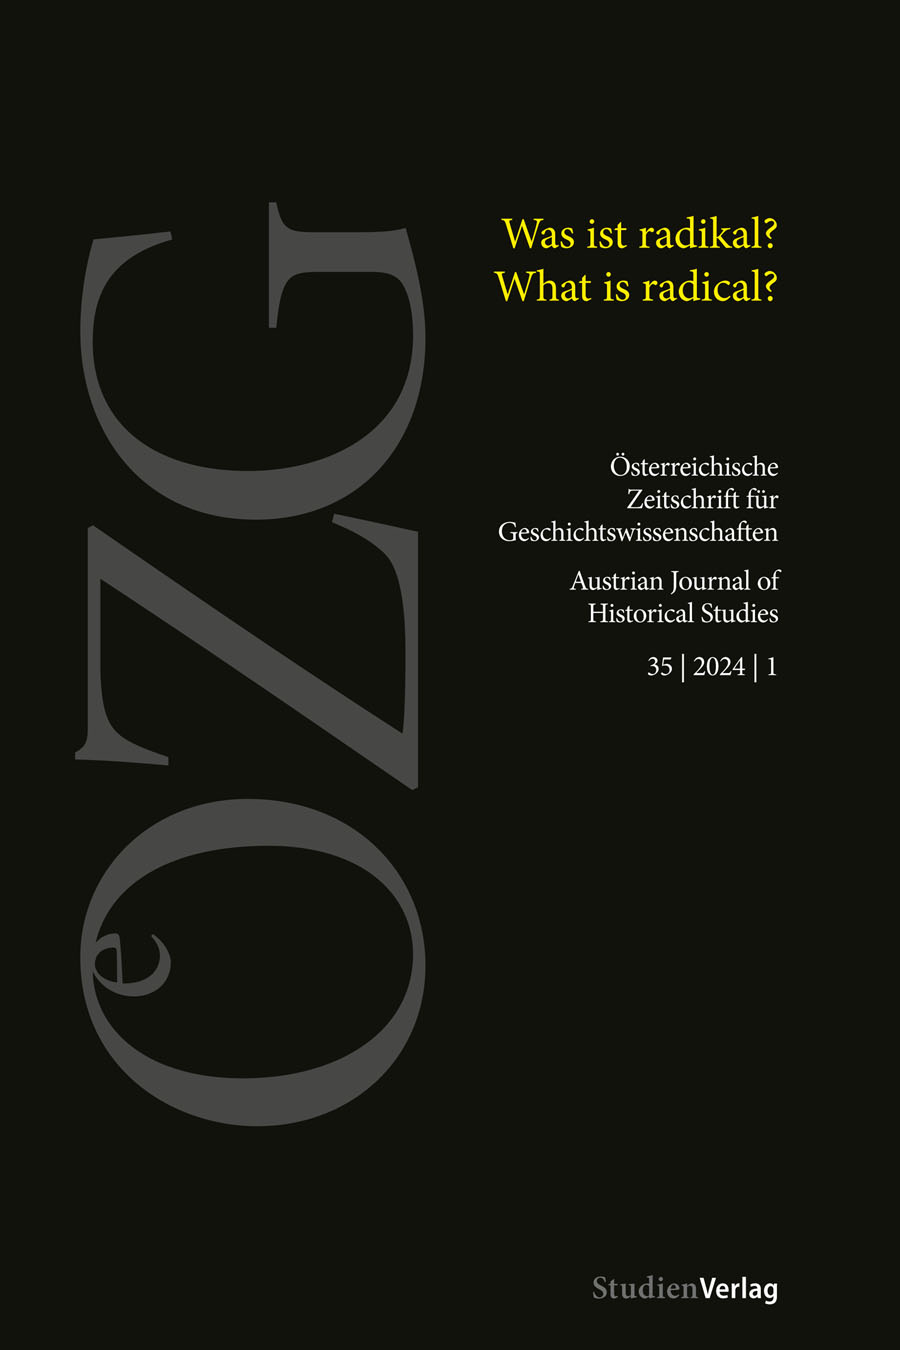 					View Vol. 35 No. 1 (2024): What is radical?
				